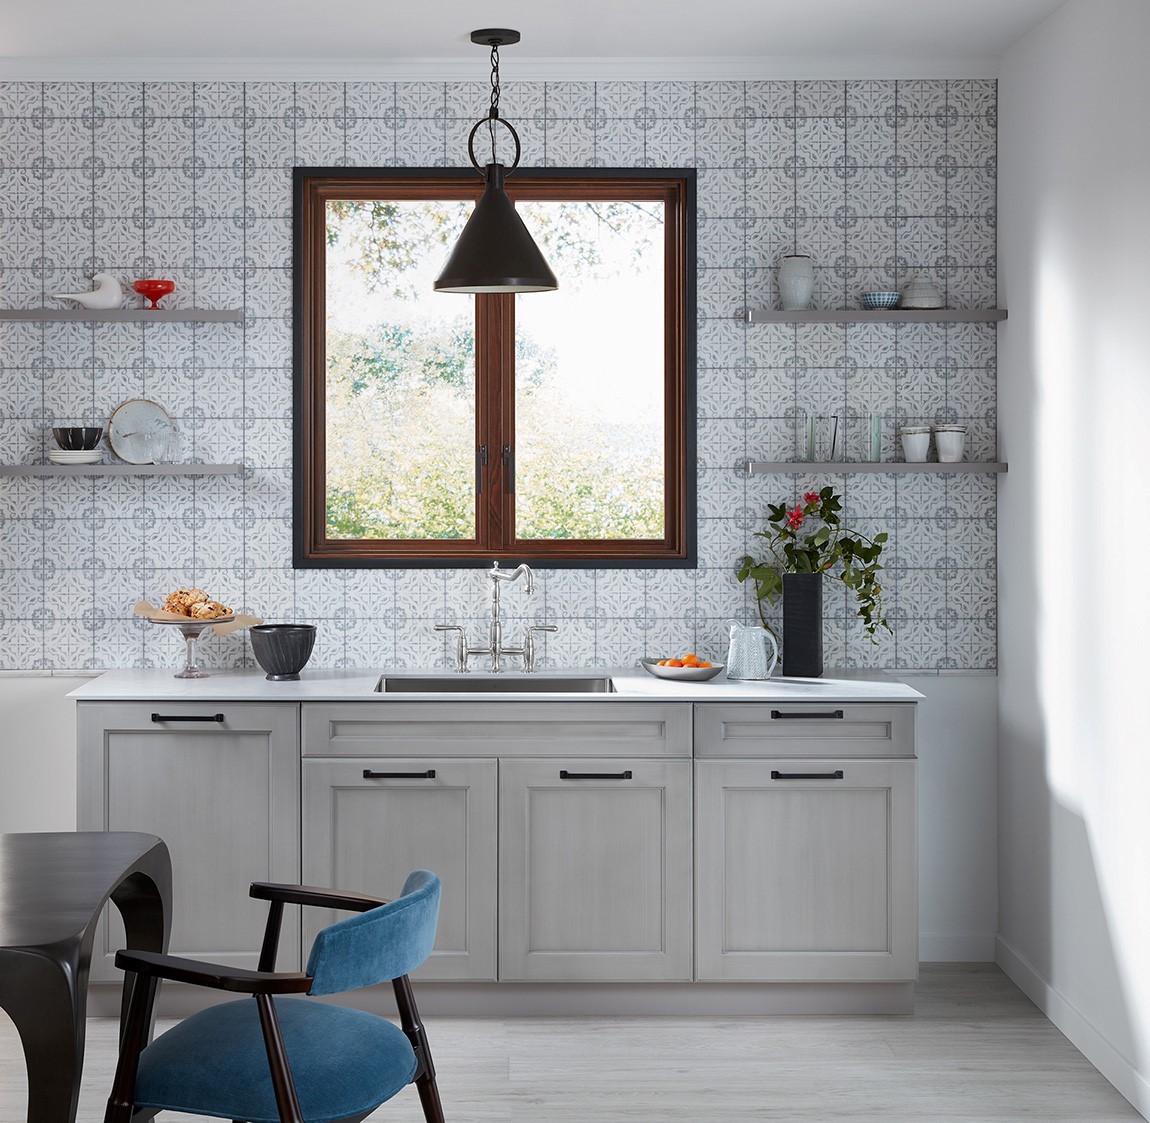 kitchen sink and counter with patterned back splash 